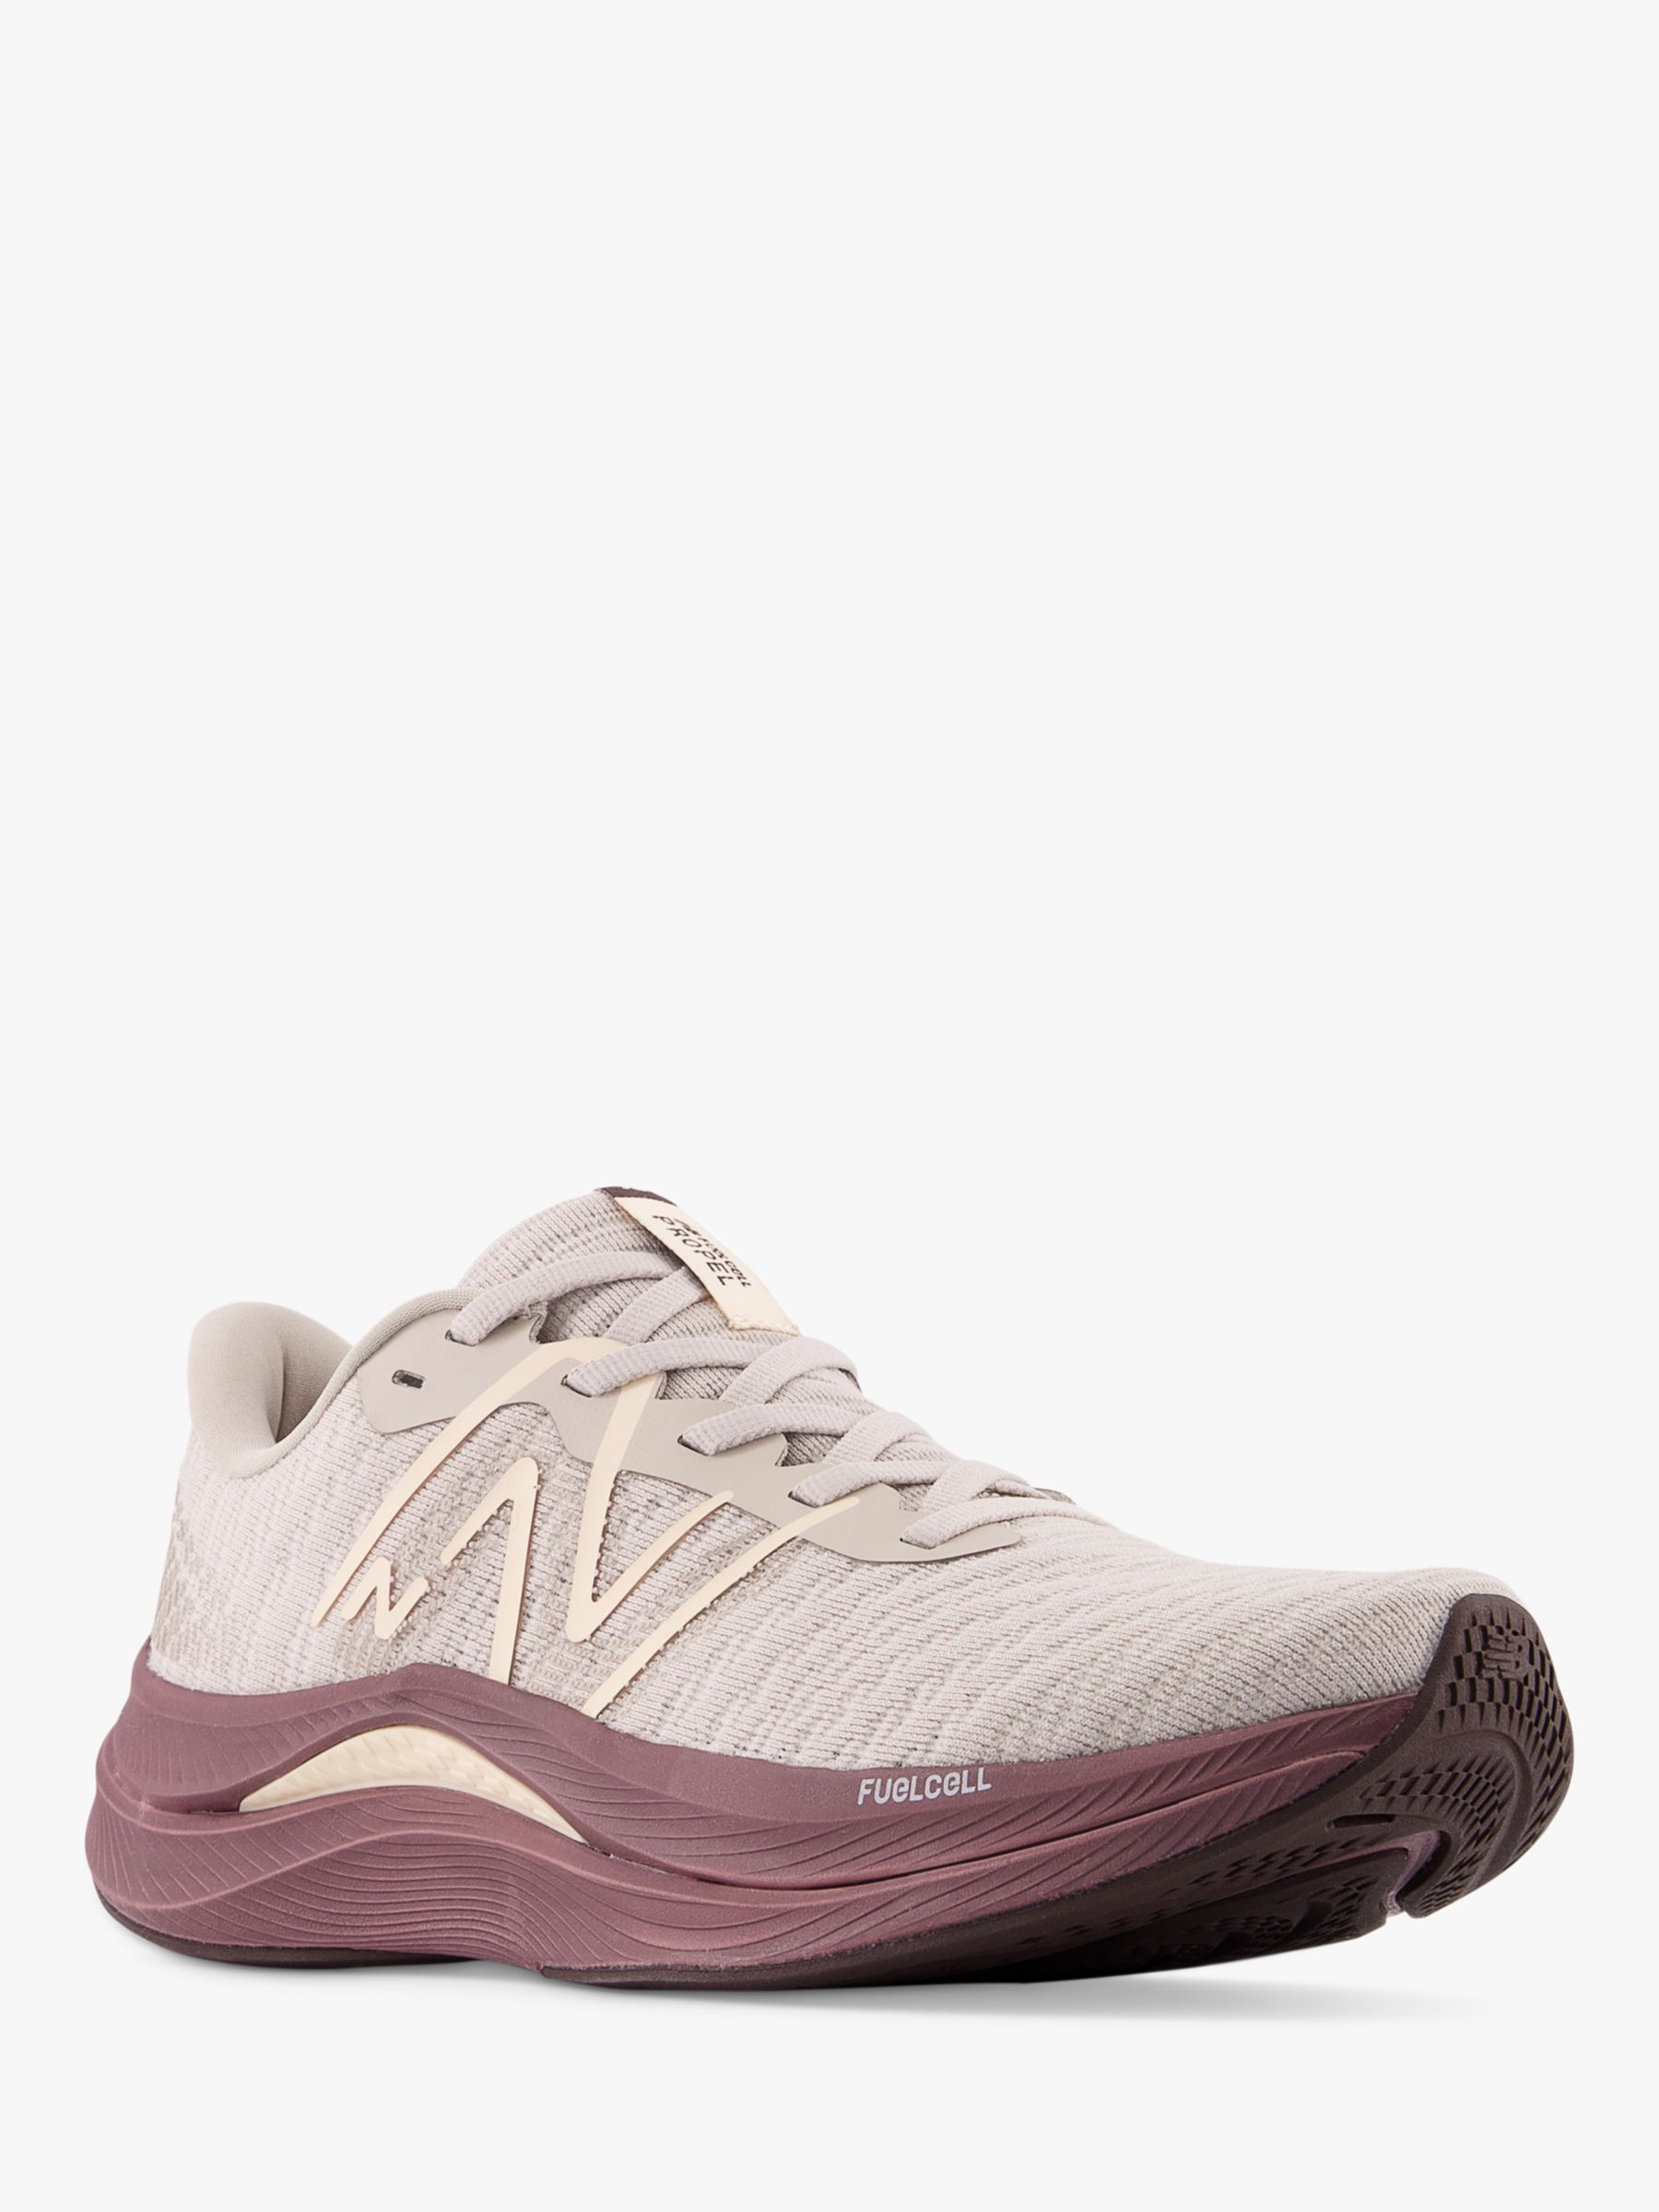 Buy New Balance FuelCell Propel v4 Women's Running Shoes, Moonrock Online at johnlewis.com